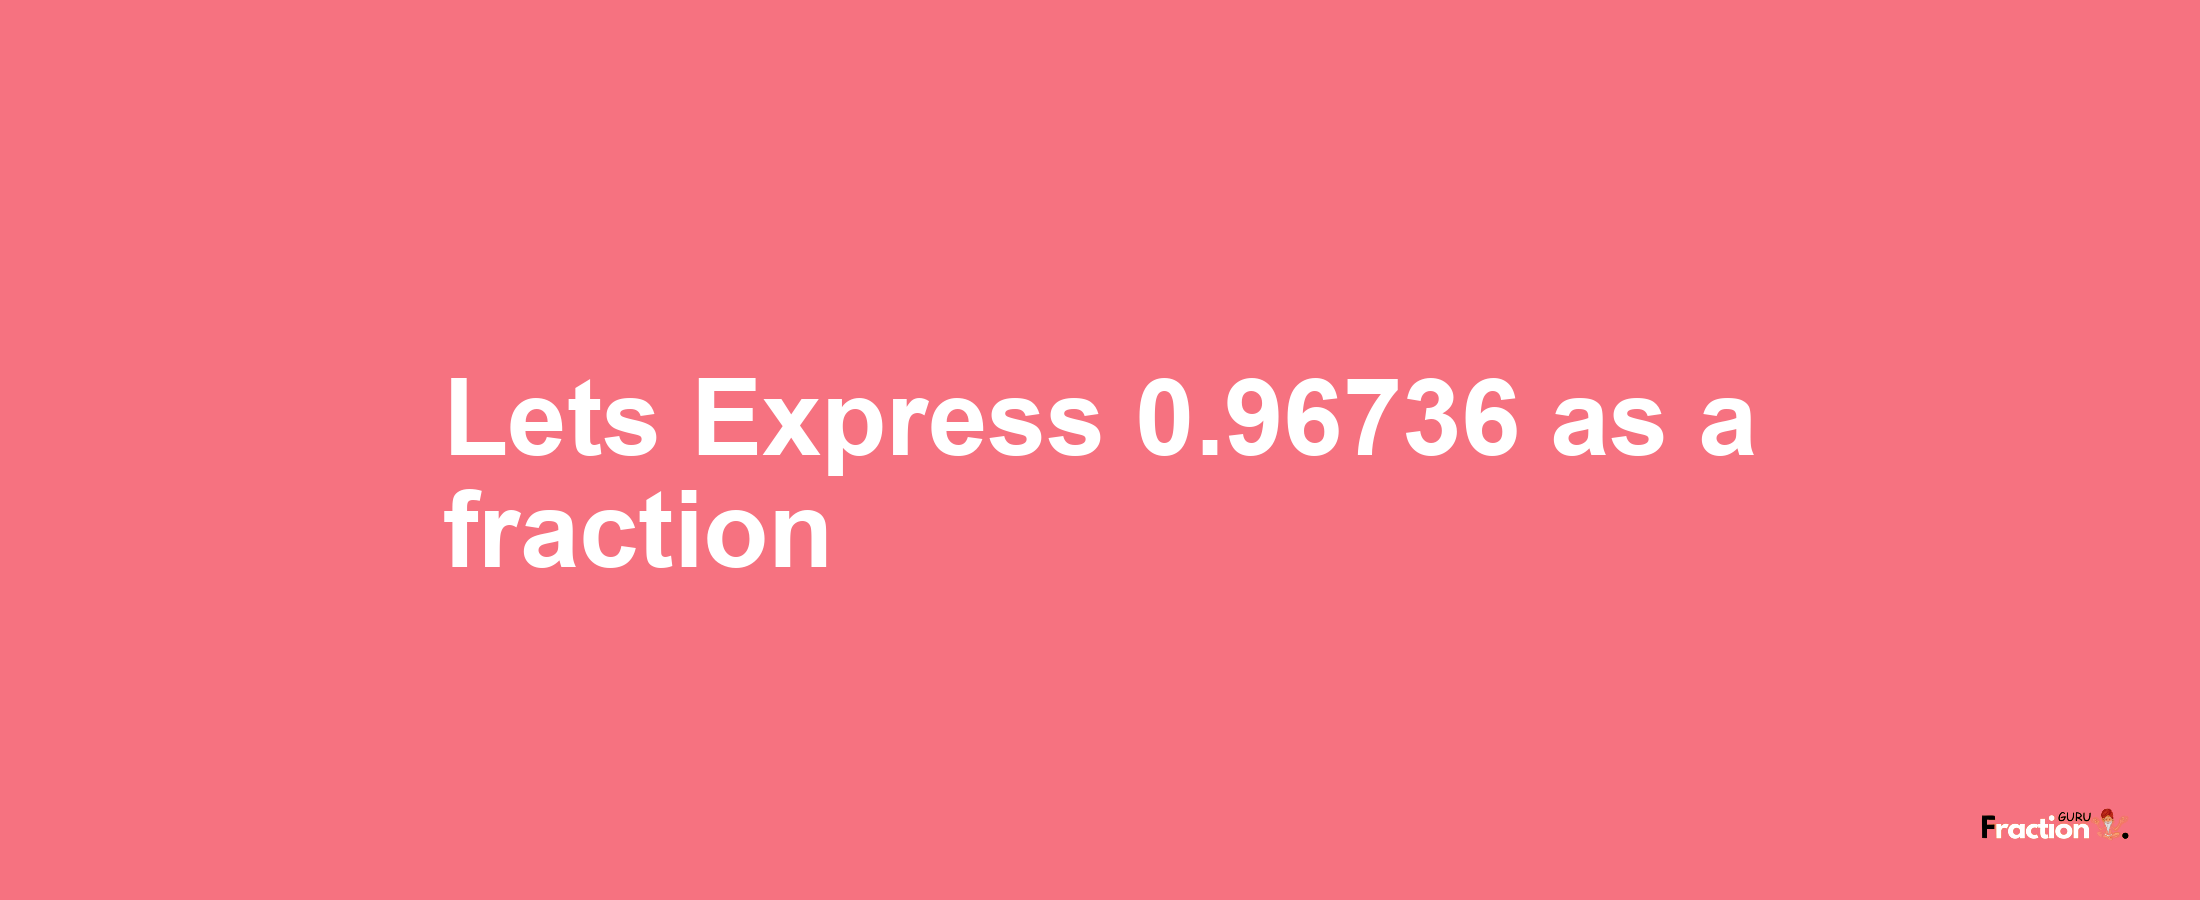 Lets Express 0.96736 as afraction